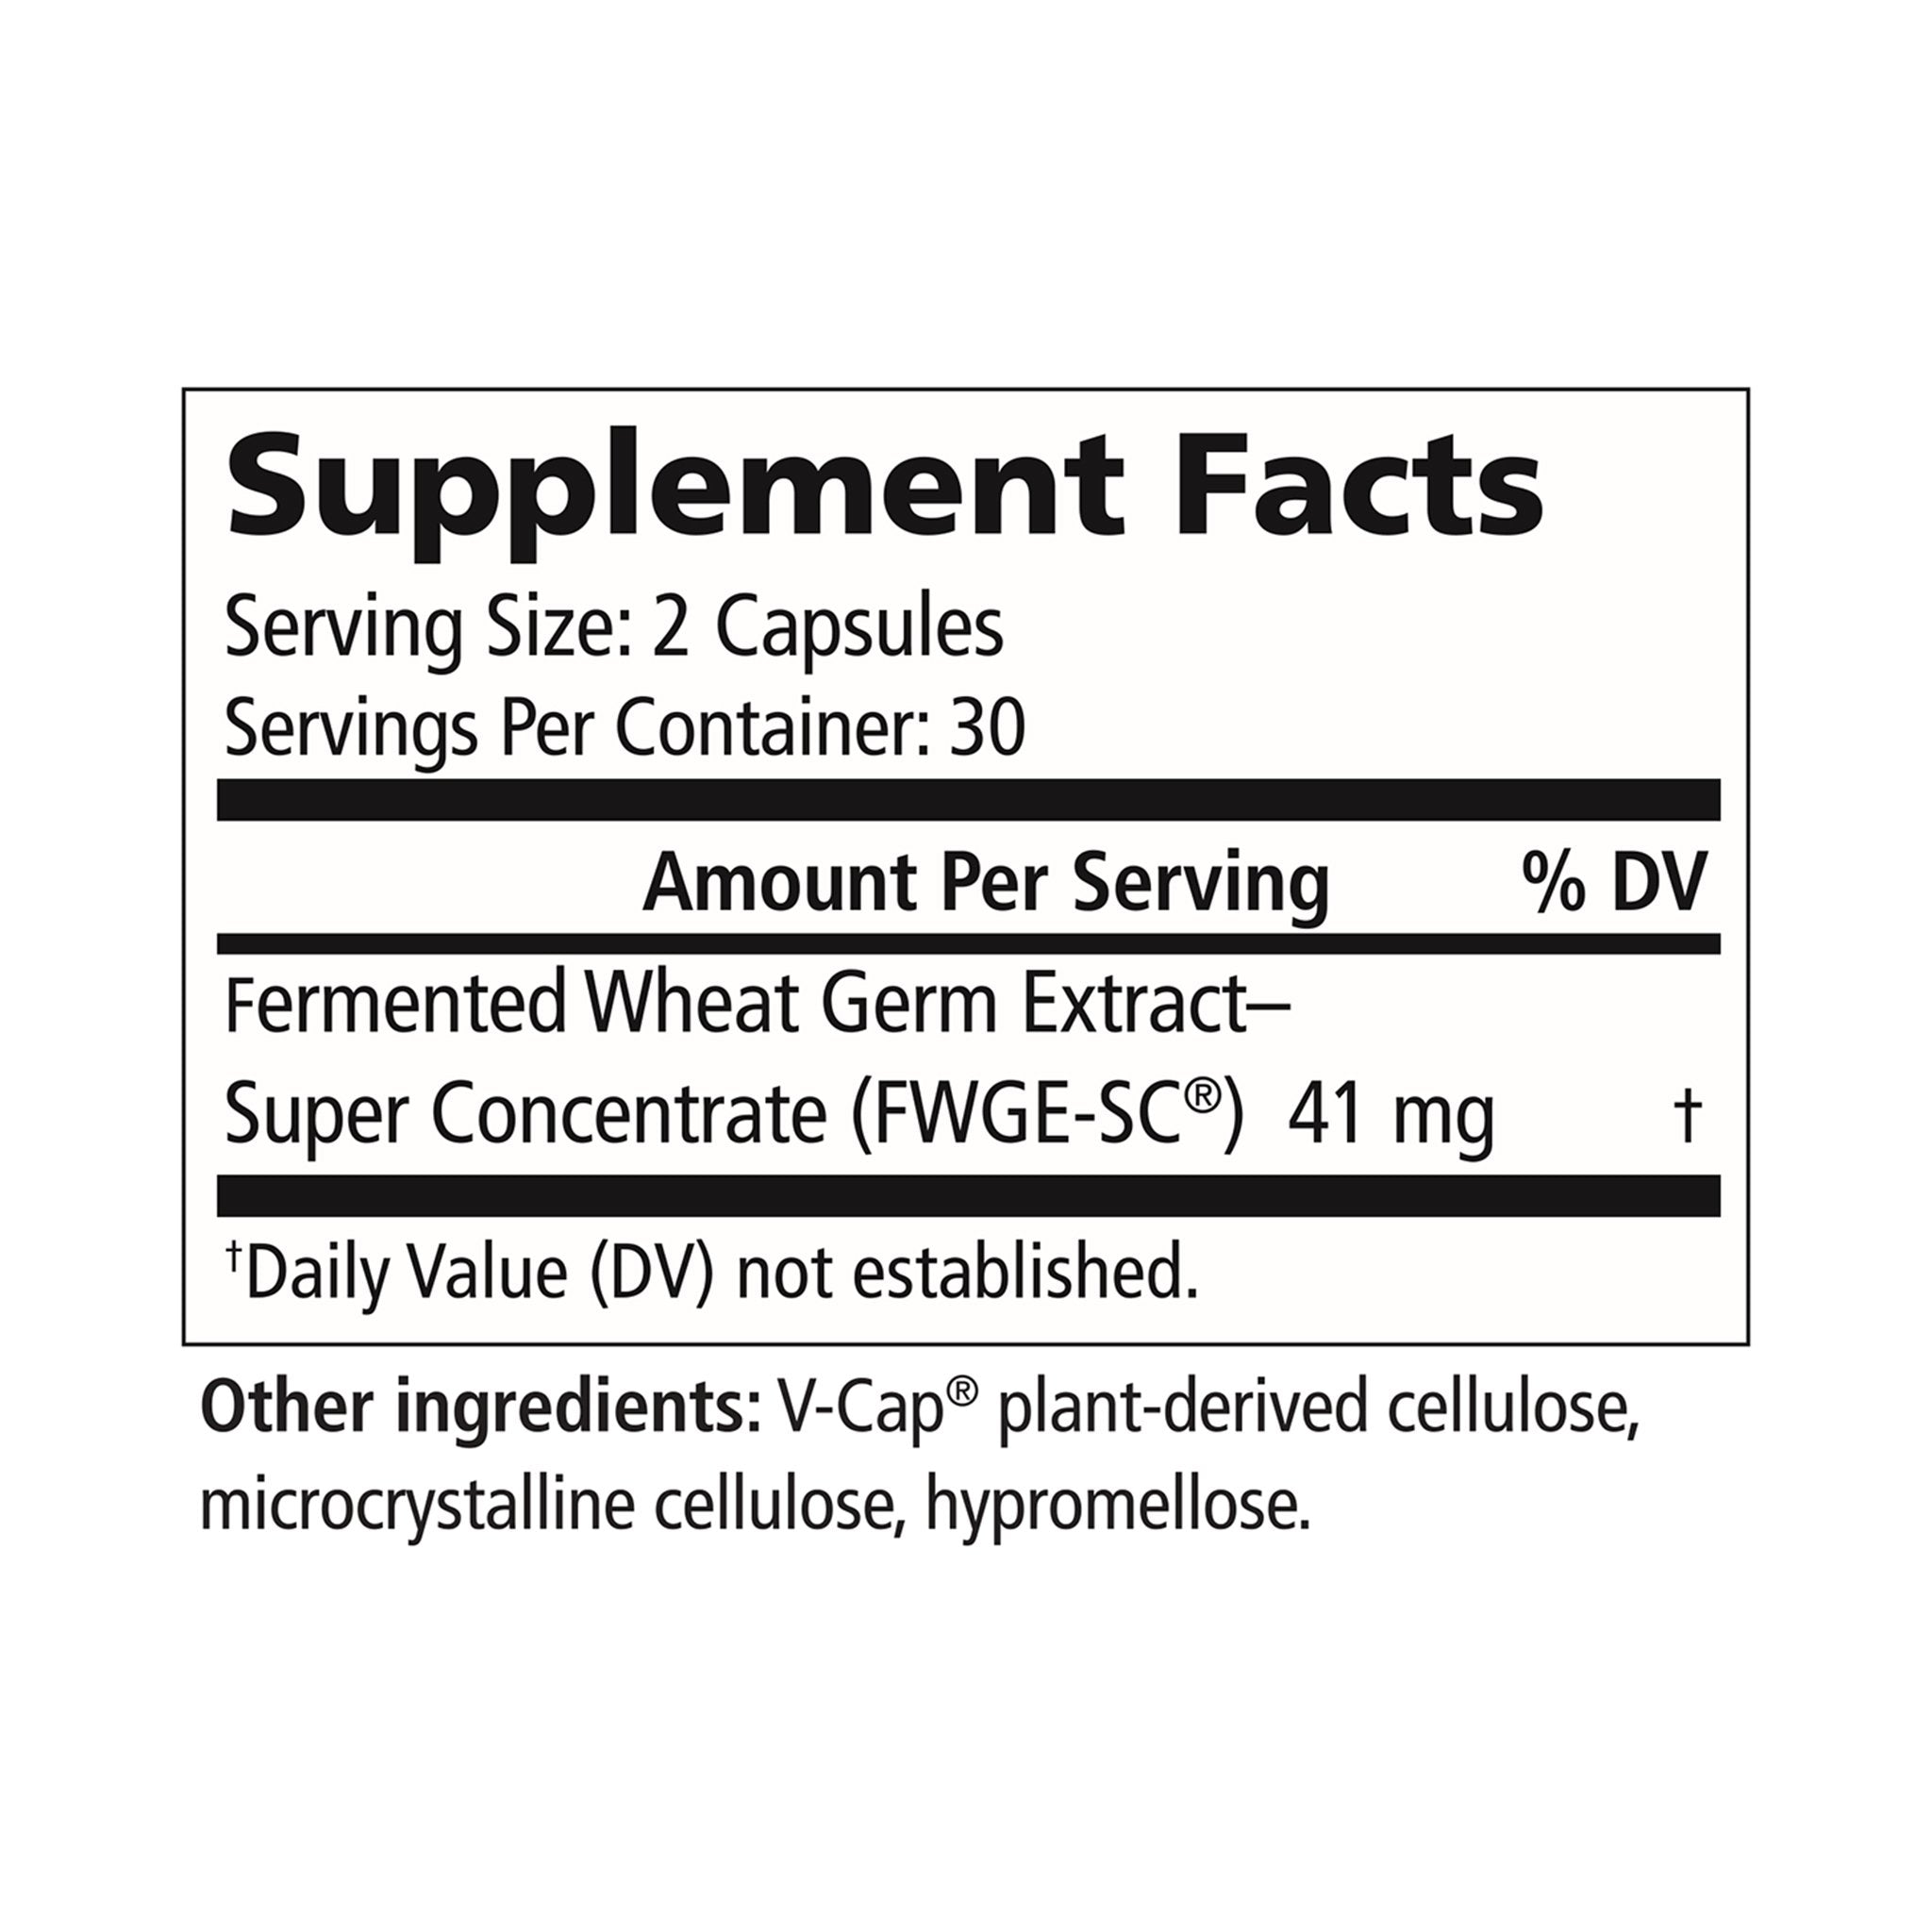 Supplement Facts for FWGE Wellness